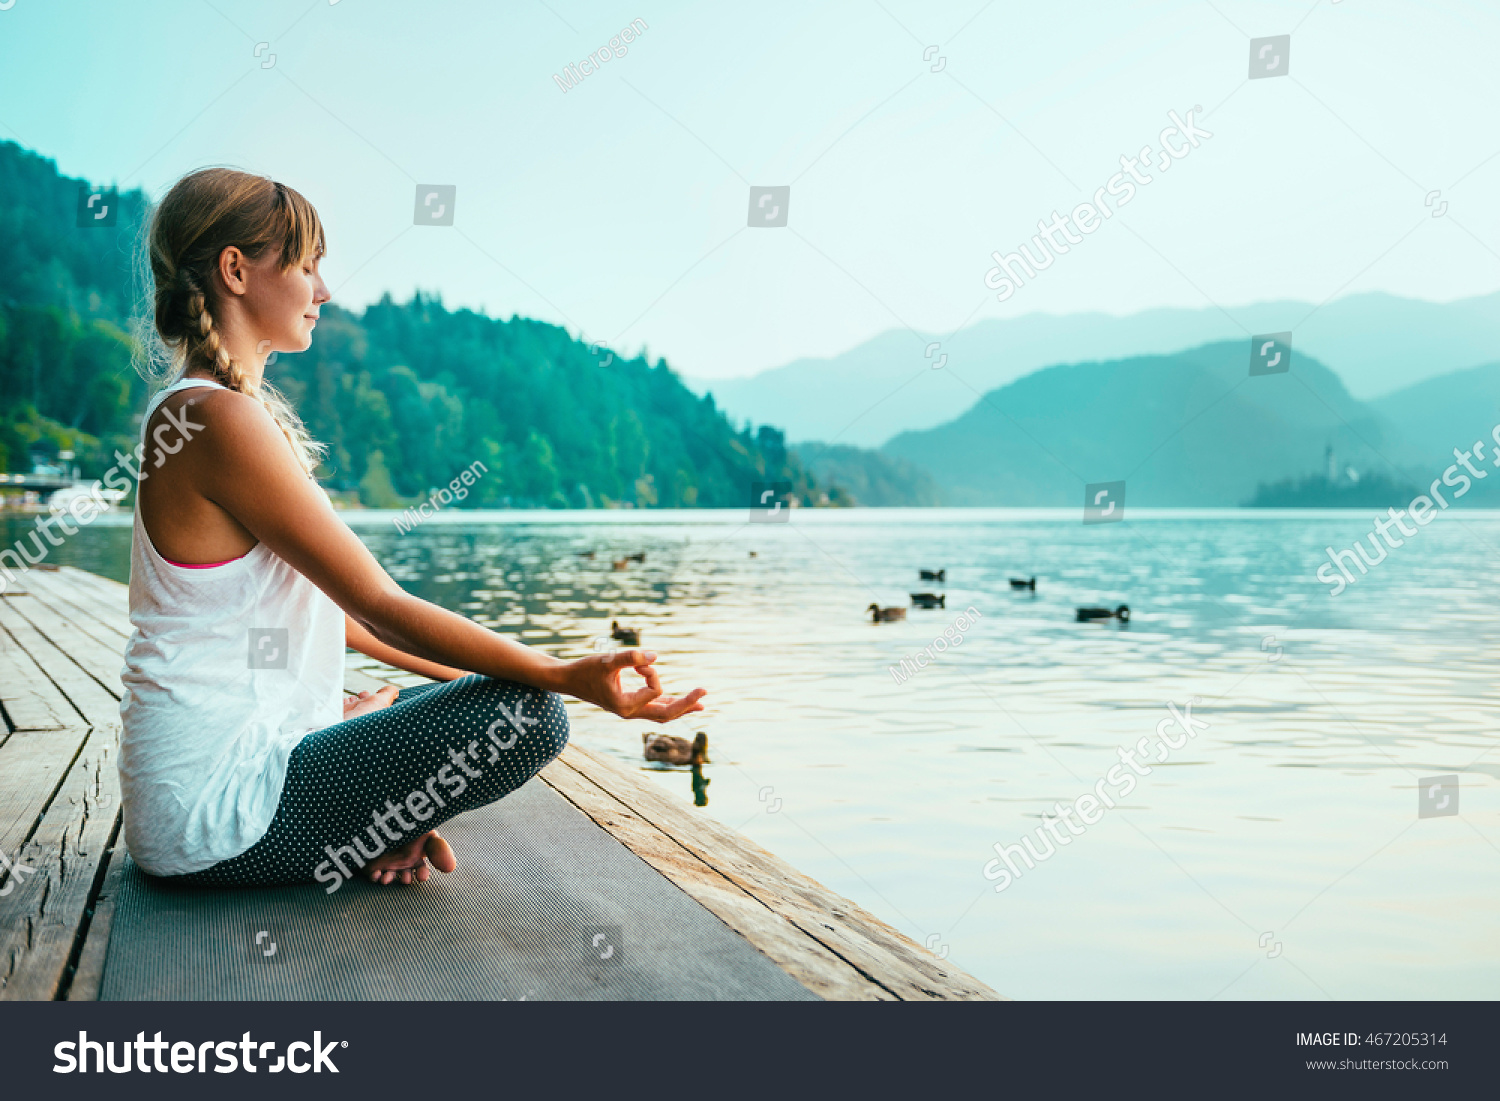 Beautiful woman in lotus position, meditating by the lake, sunset, water birds #467205314